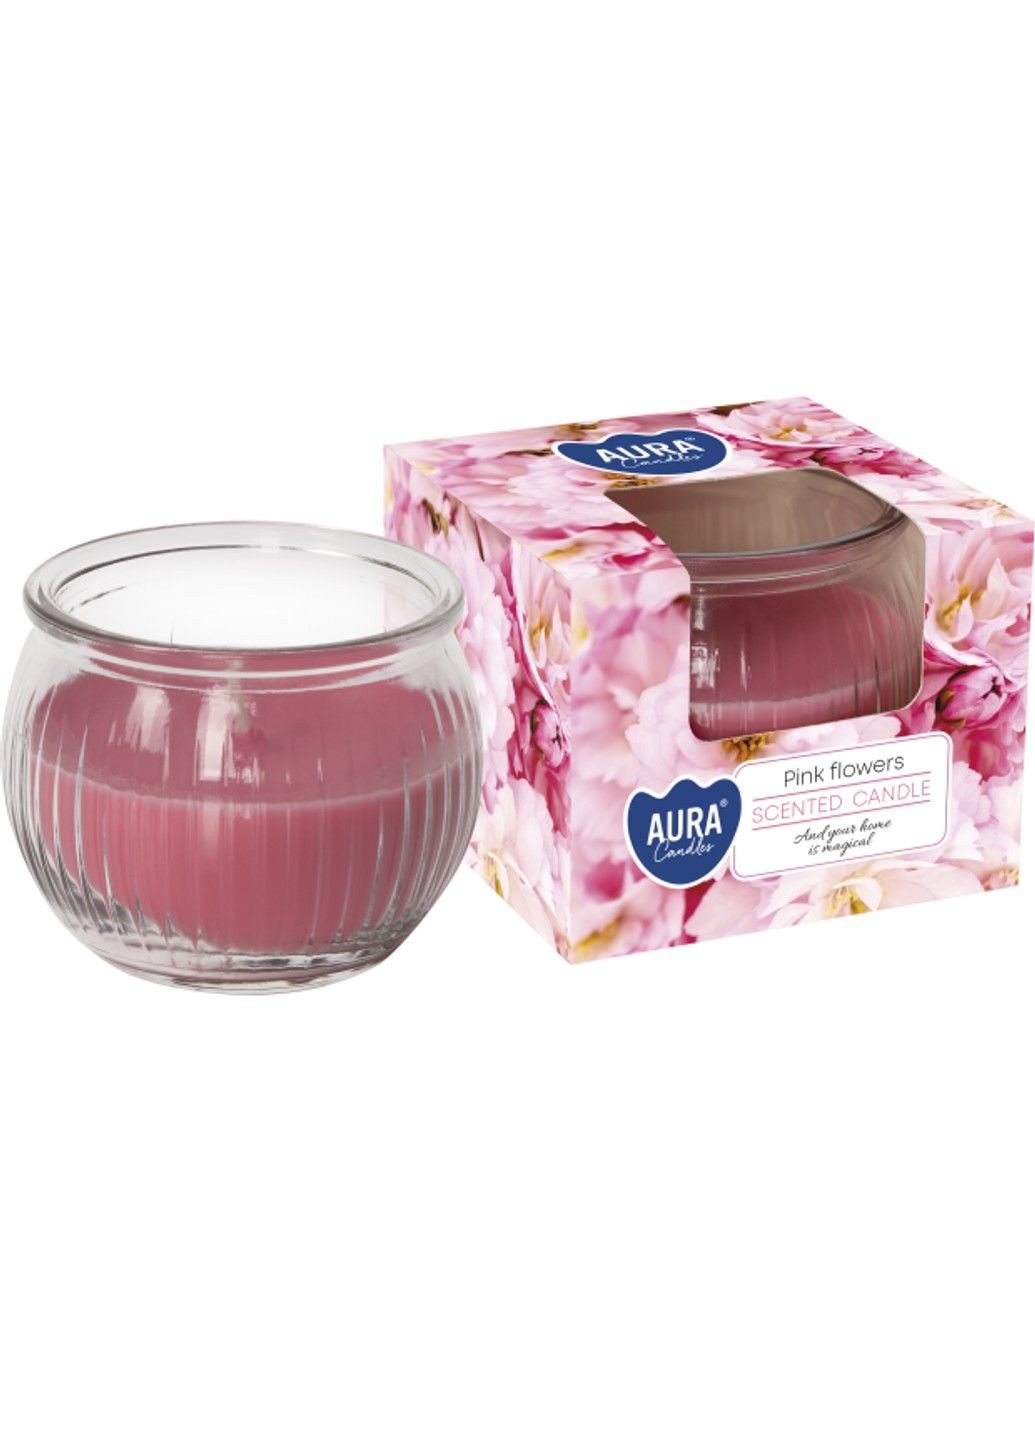 Ароматична свічка Scented Candle Pink Flowers Bispol (280926746)